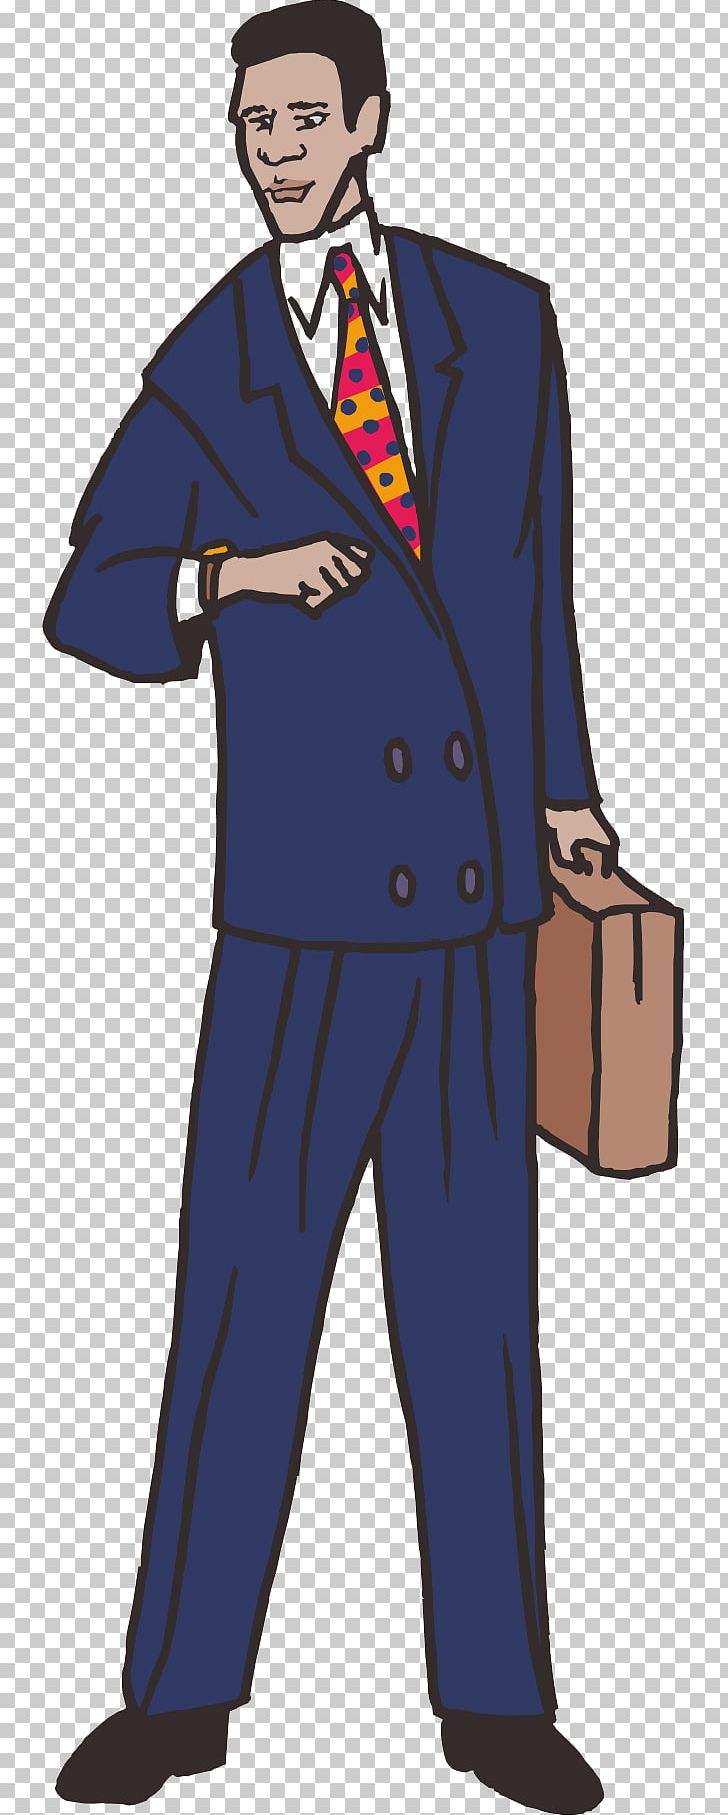 Man Computer File PNG, Clipart, Business Man, Cartoon, Costume Design, Encapsulated Postscript, Fictional Character Free PNG Download